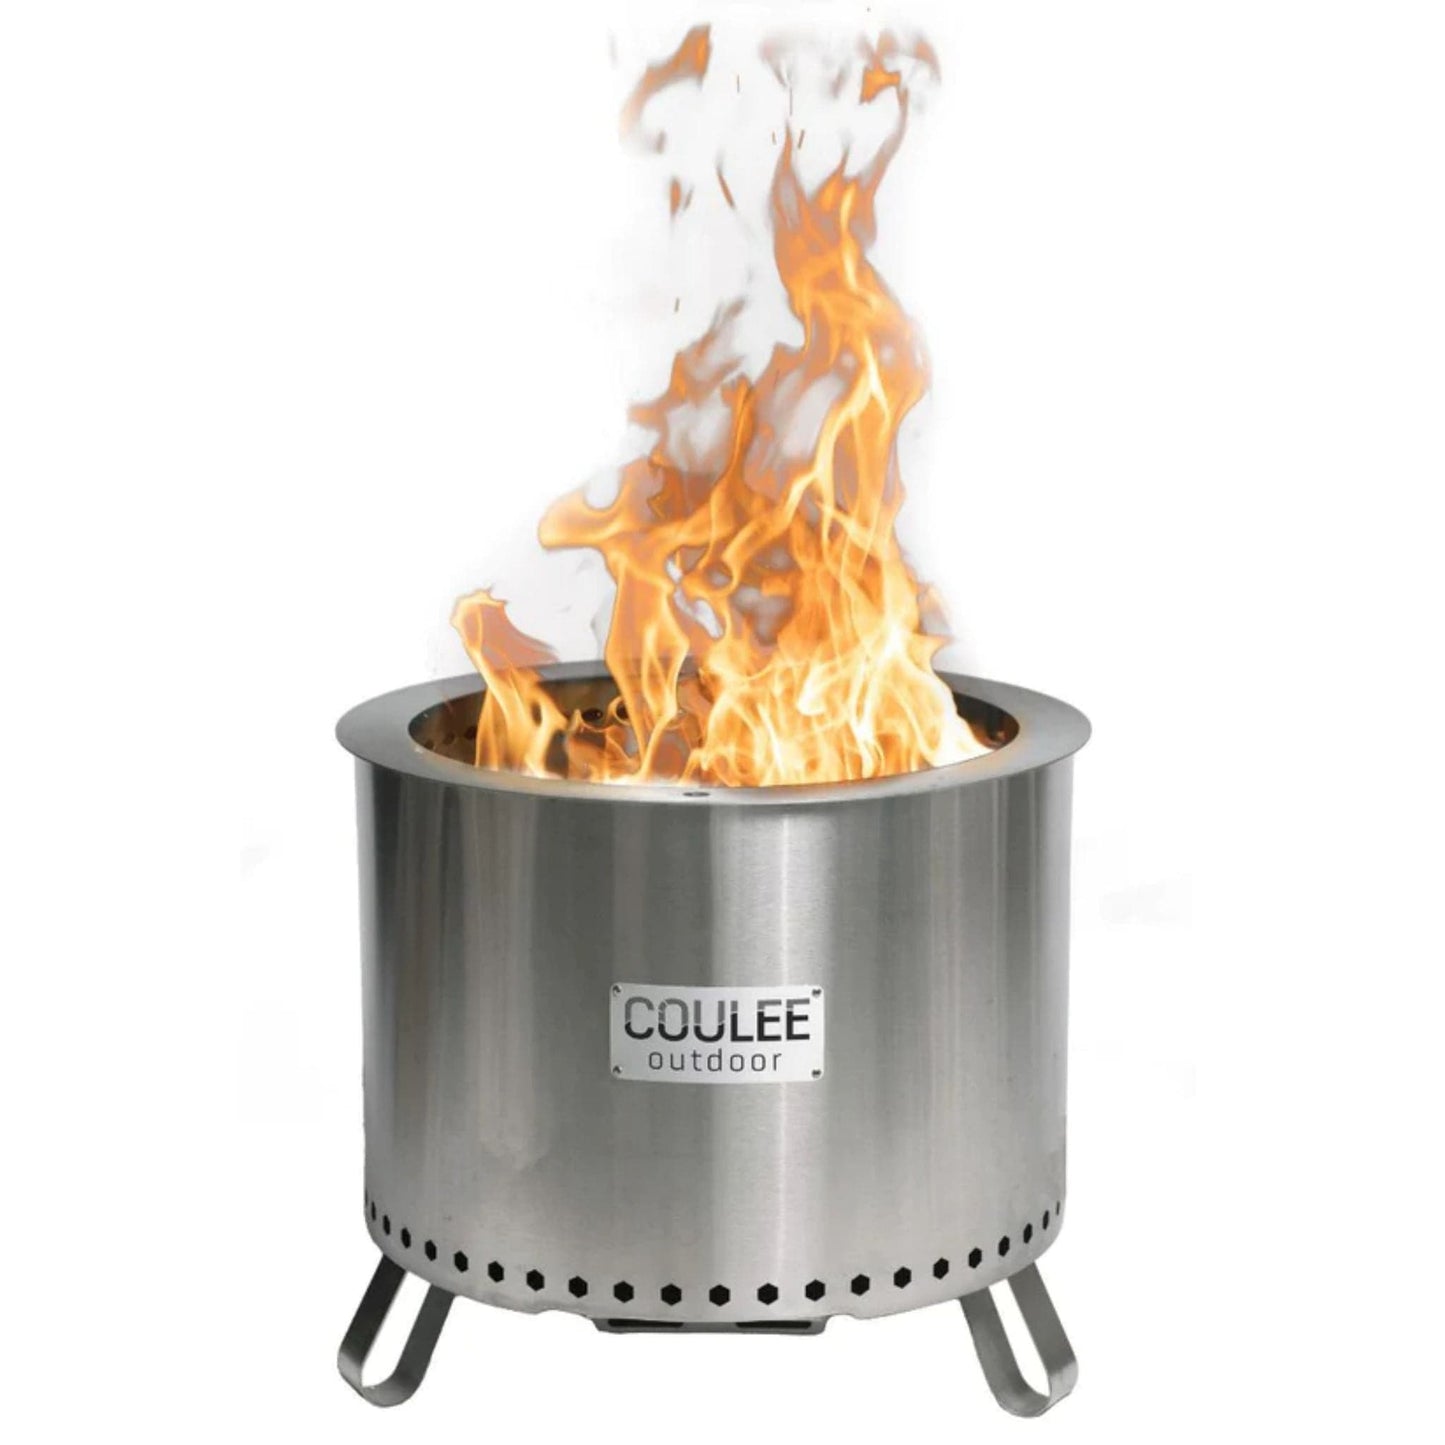 Coulee Colorado 21" Smokeless Multifuel Portable Stainless Steel Fire Pit